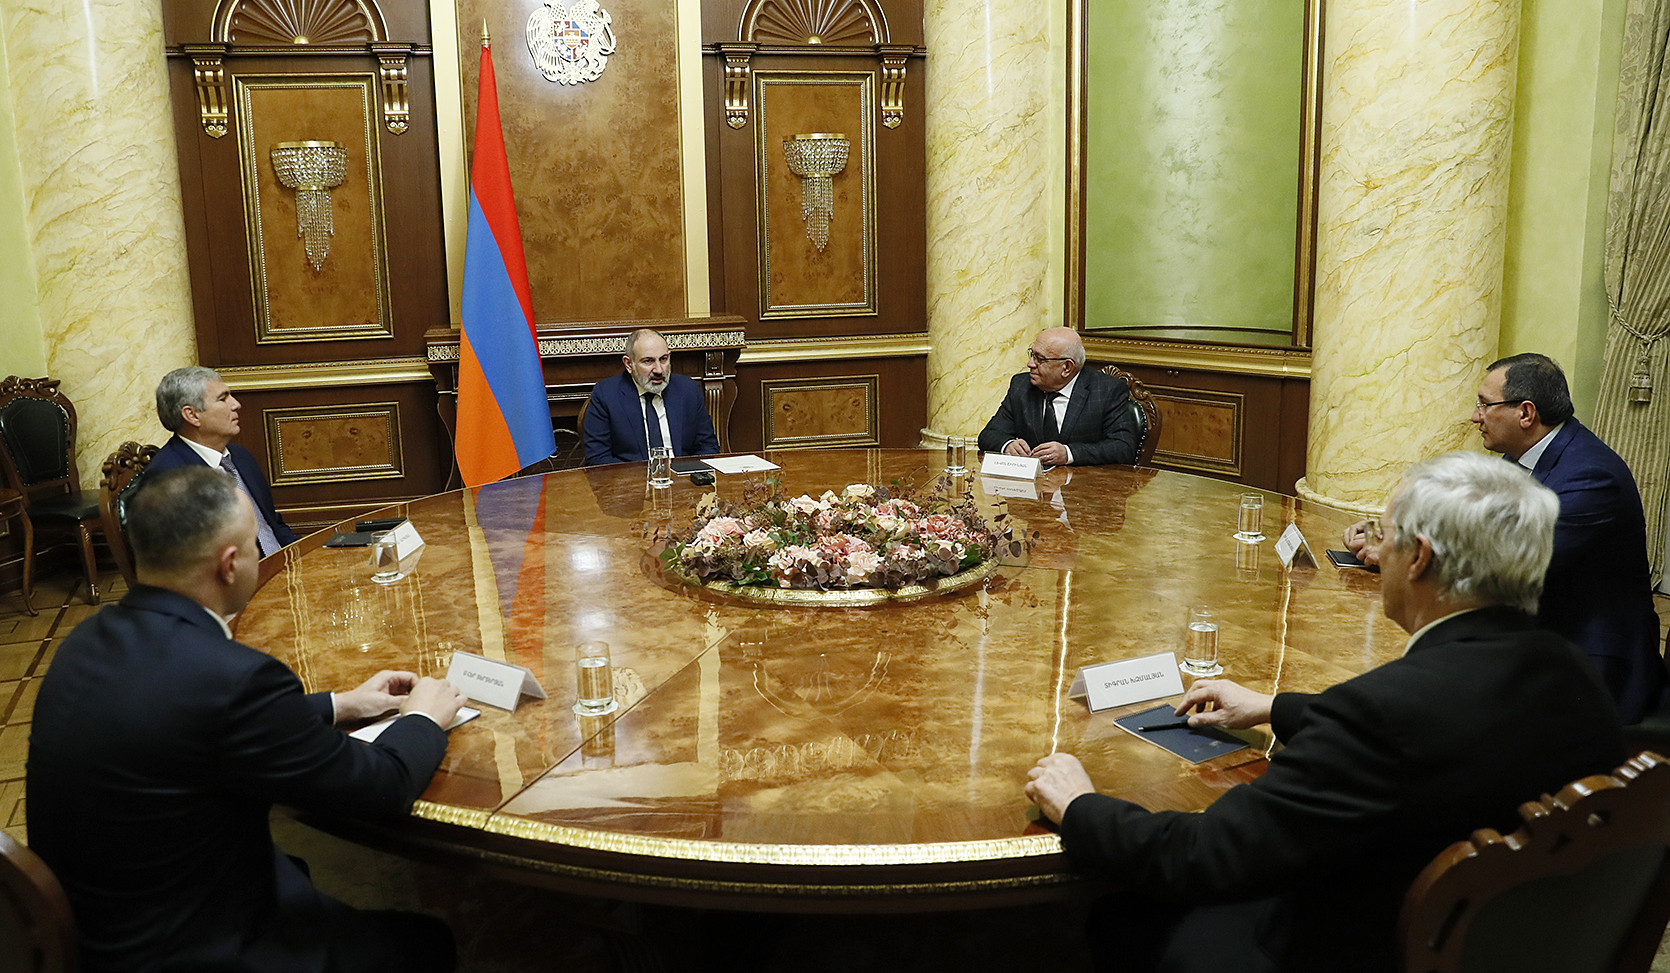 Prime Minister meets with the leaders of extra-parliamentary political forces